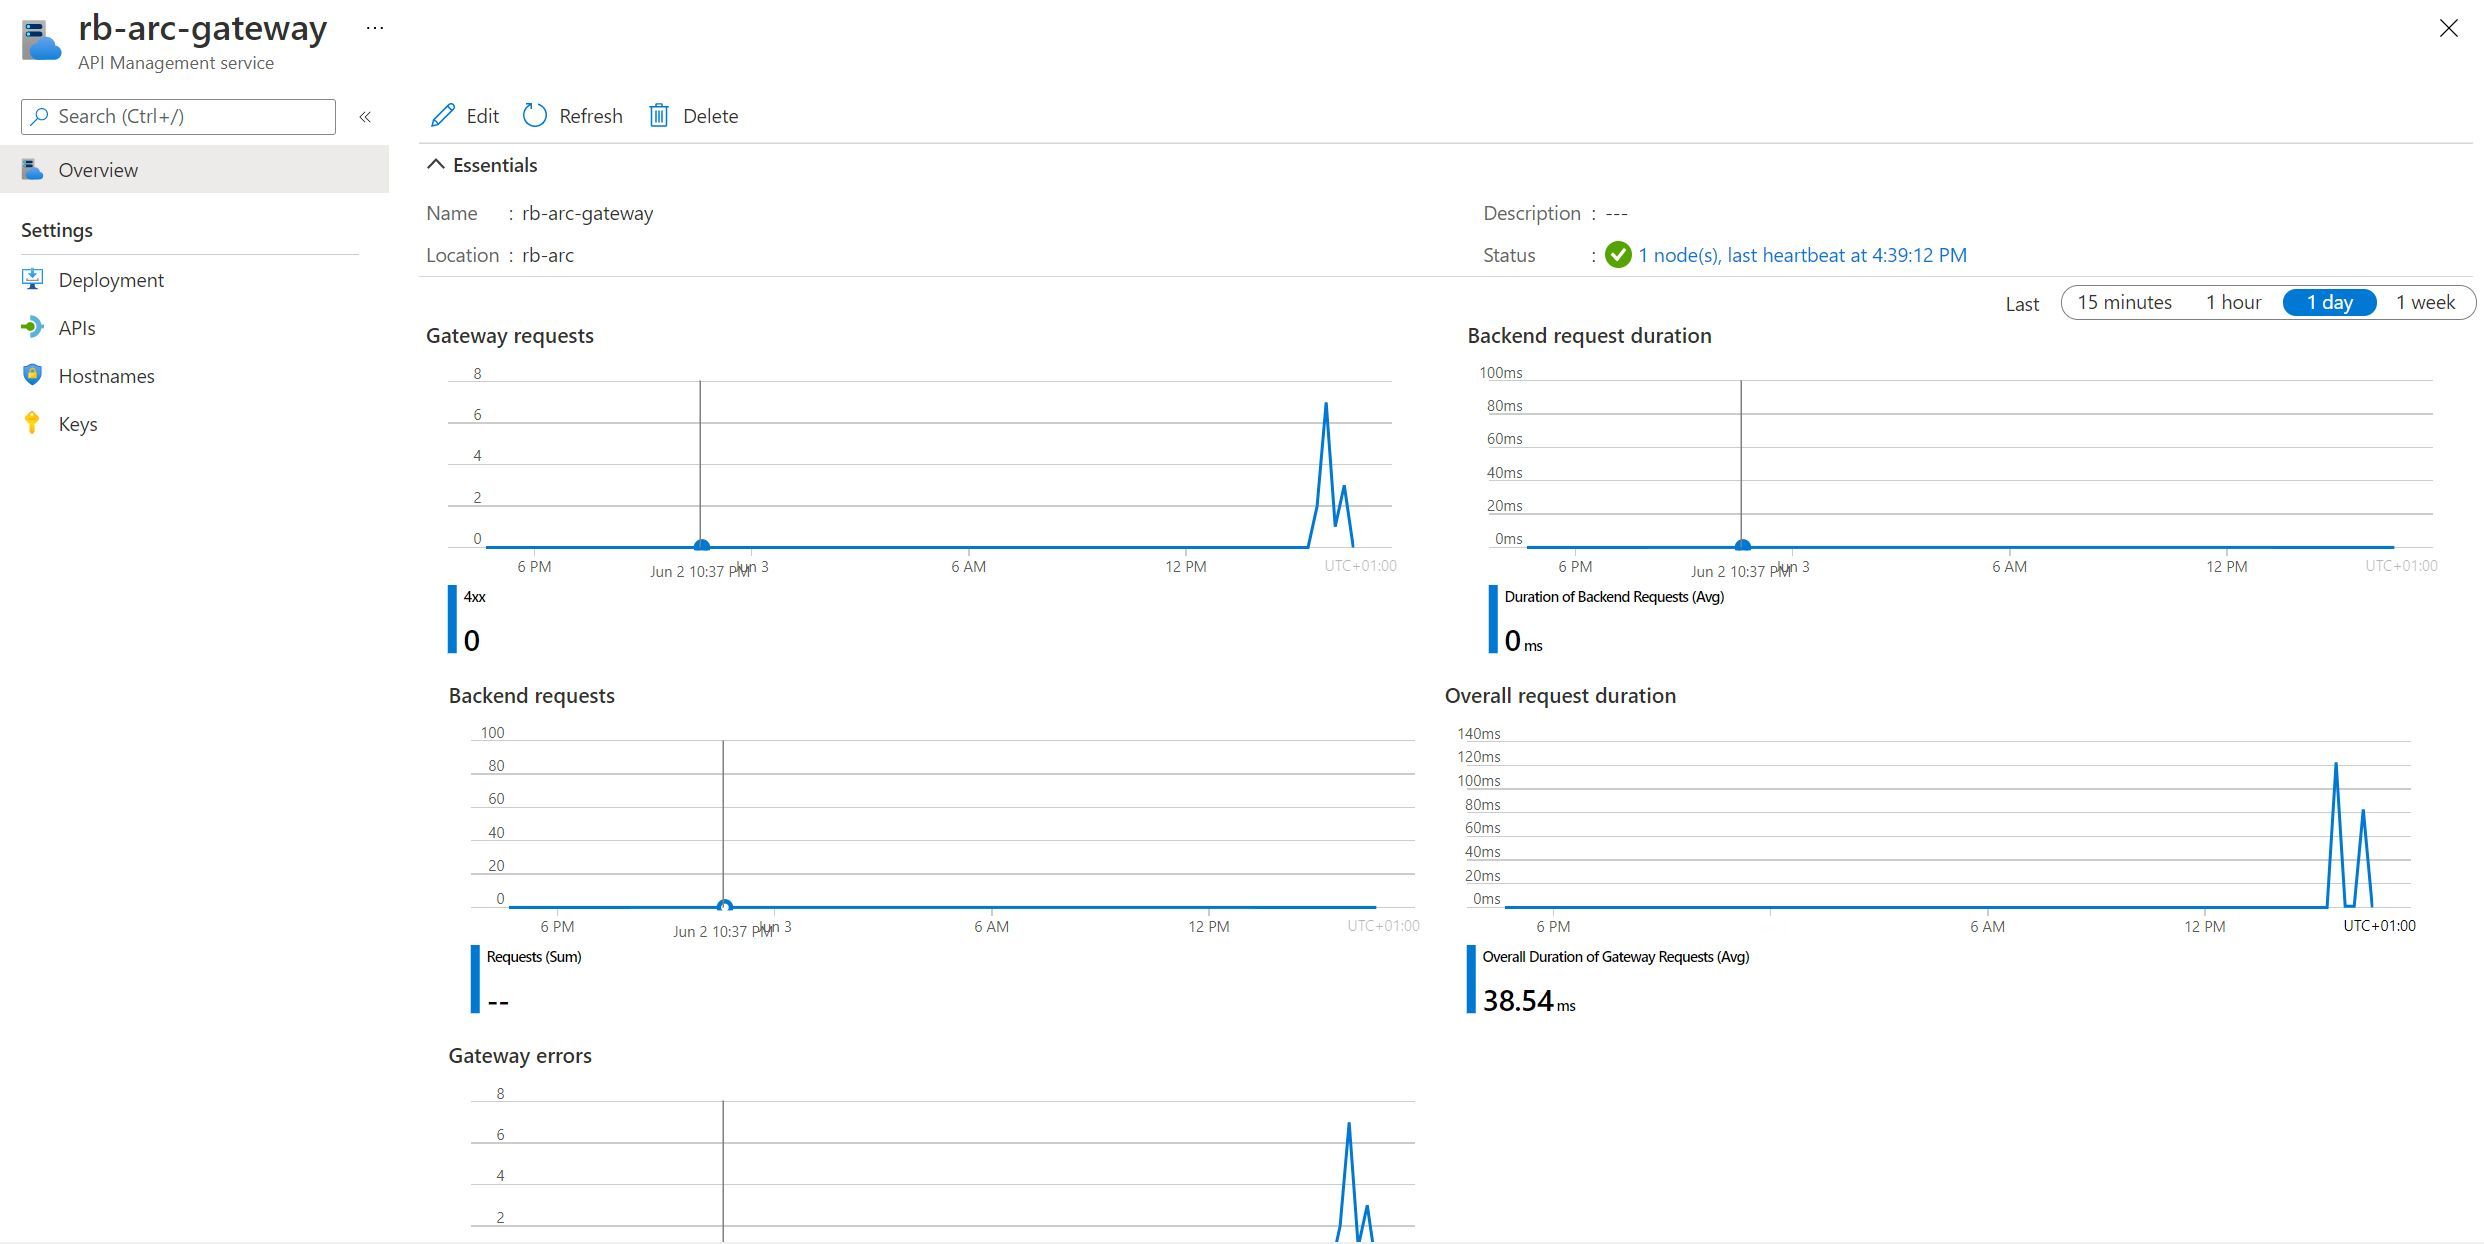 Screenshot showing the metrics available in the API Management Service Azure Portal blade for the self-hosted gateway